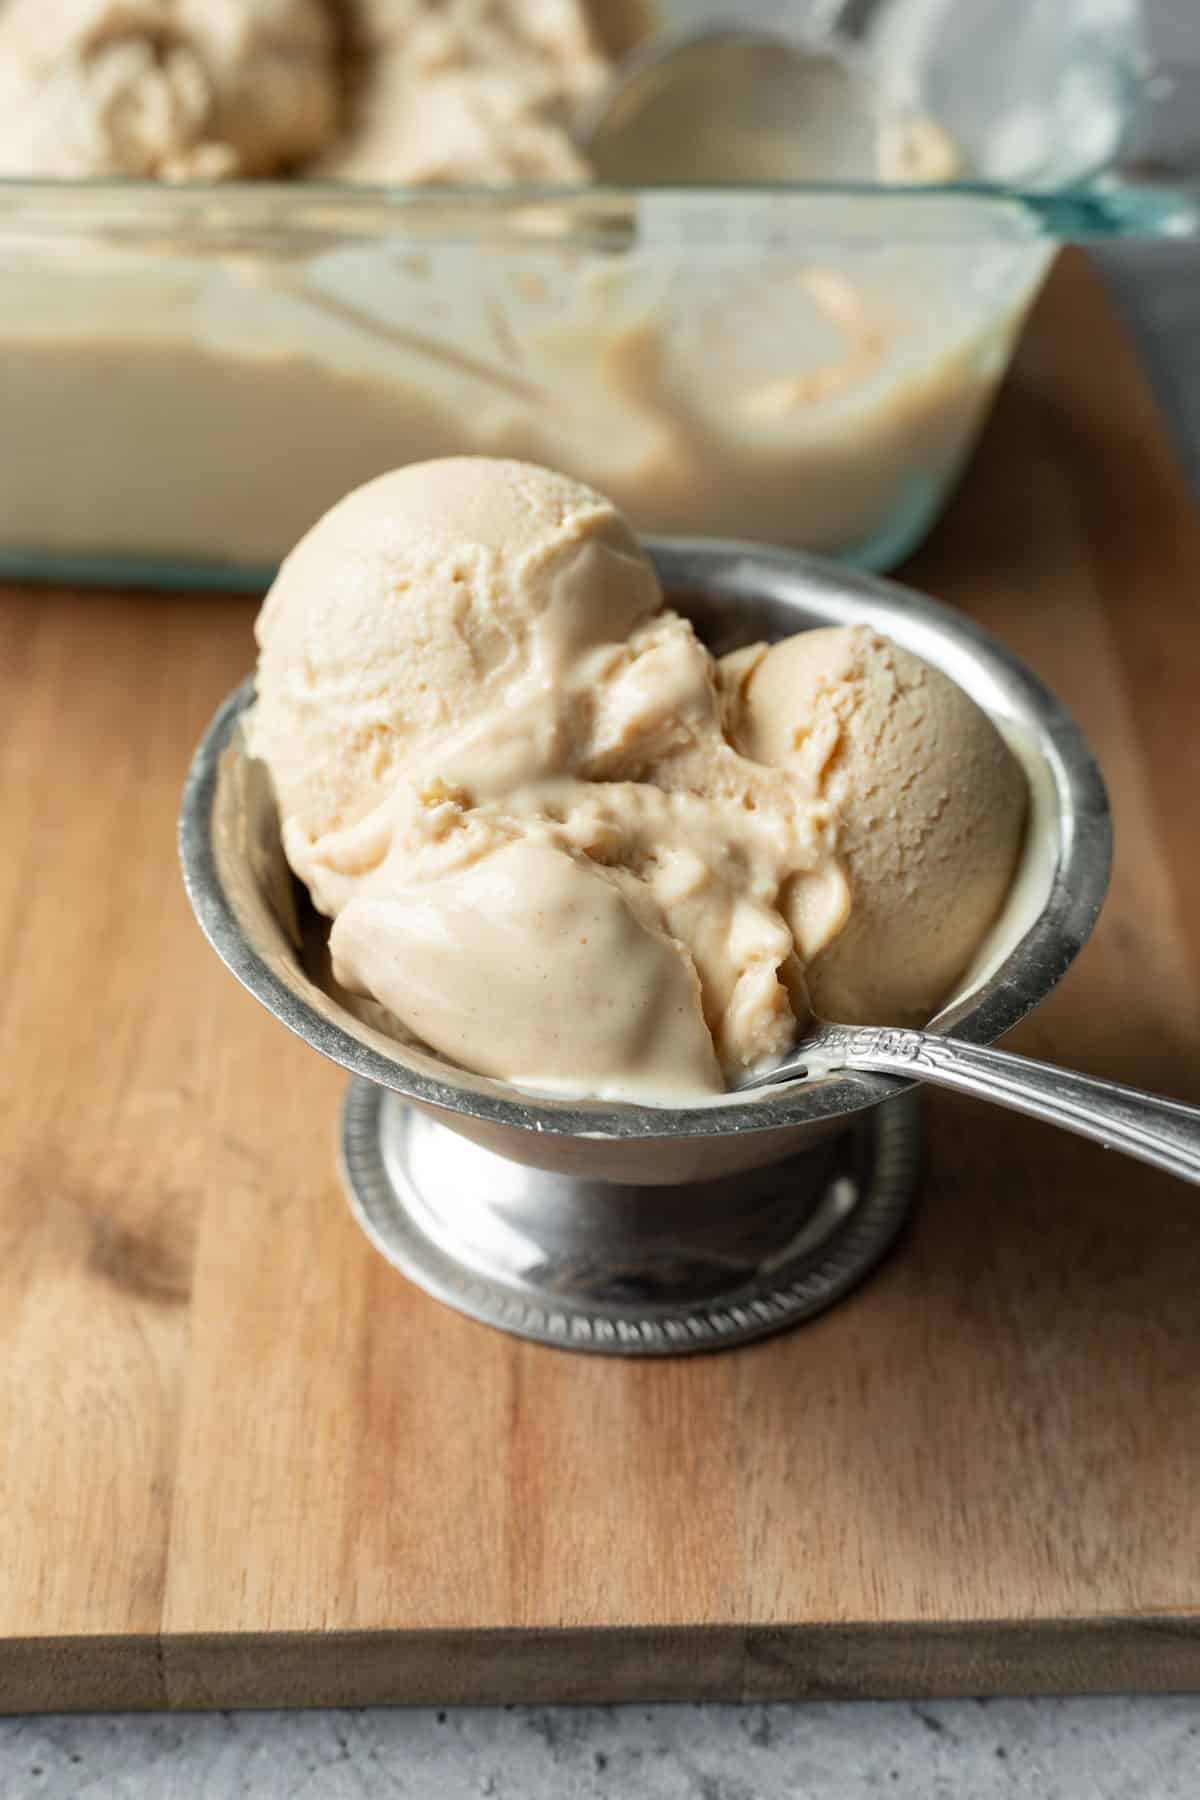 A serving of vegan tofu ice cream in a silver dish with the rest in the background.